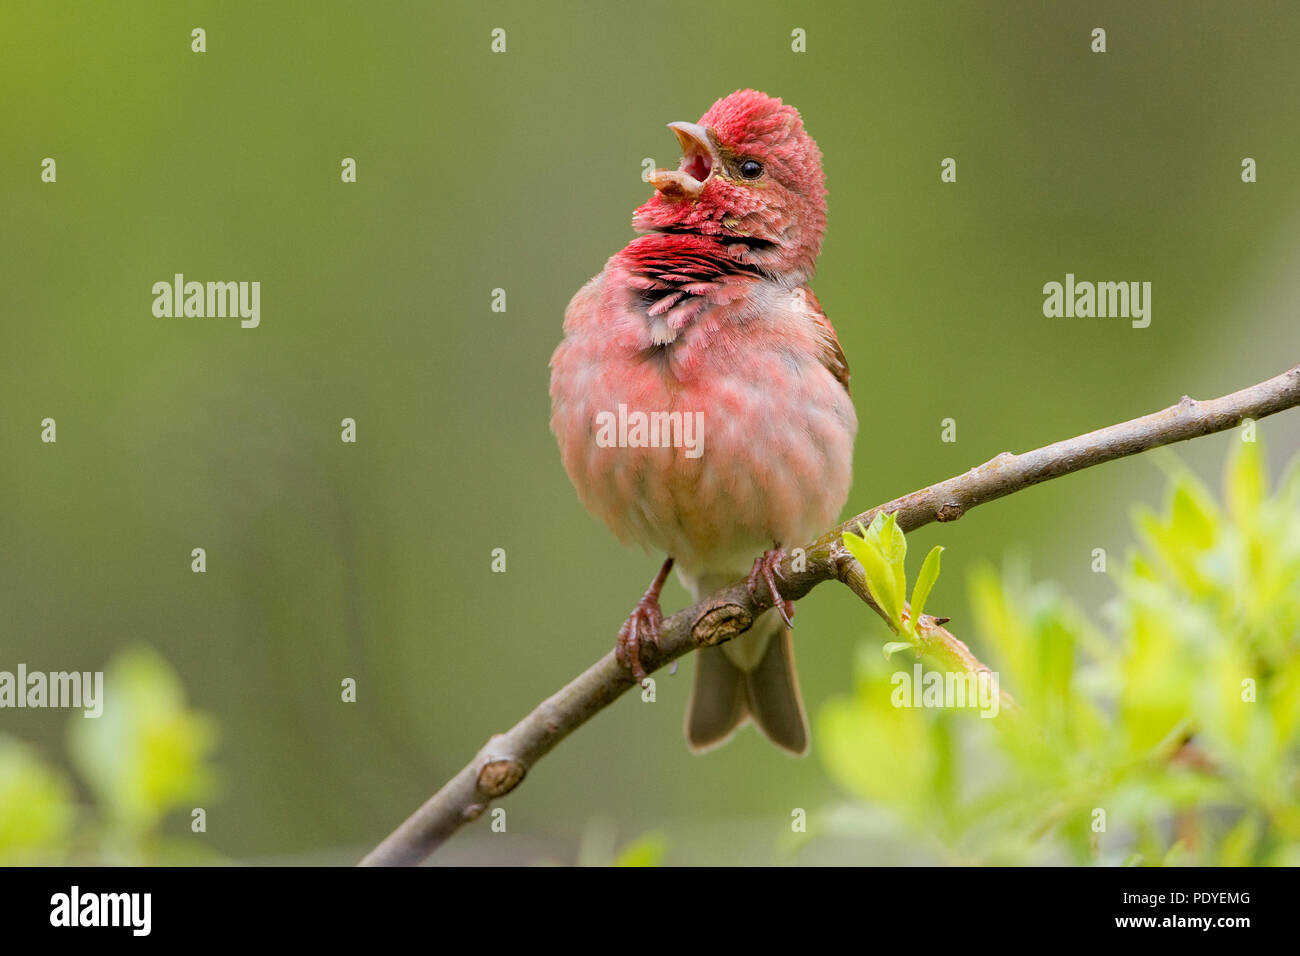 A Scarlet Rosefinch singing on a twig Stock Photo